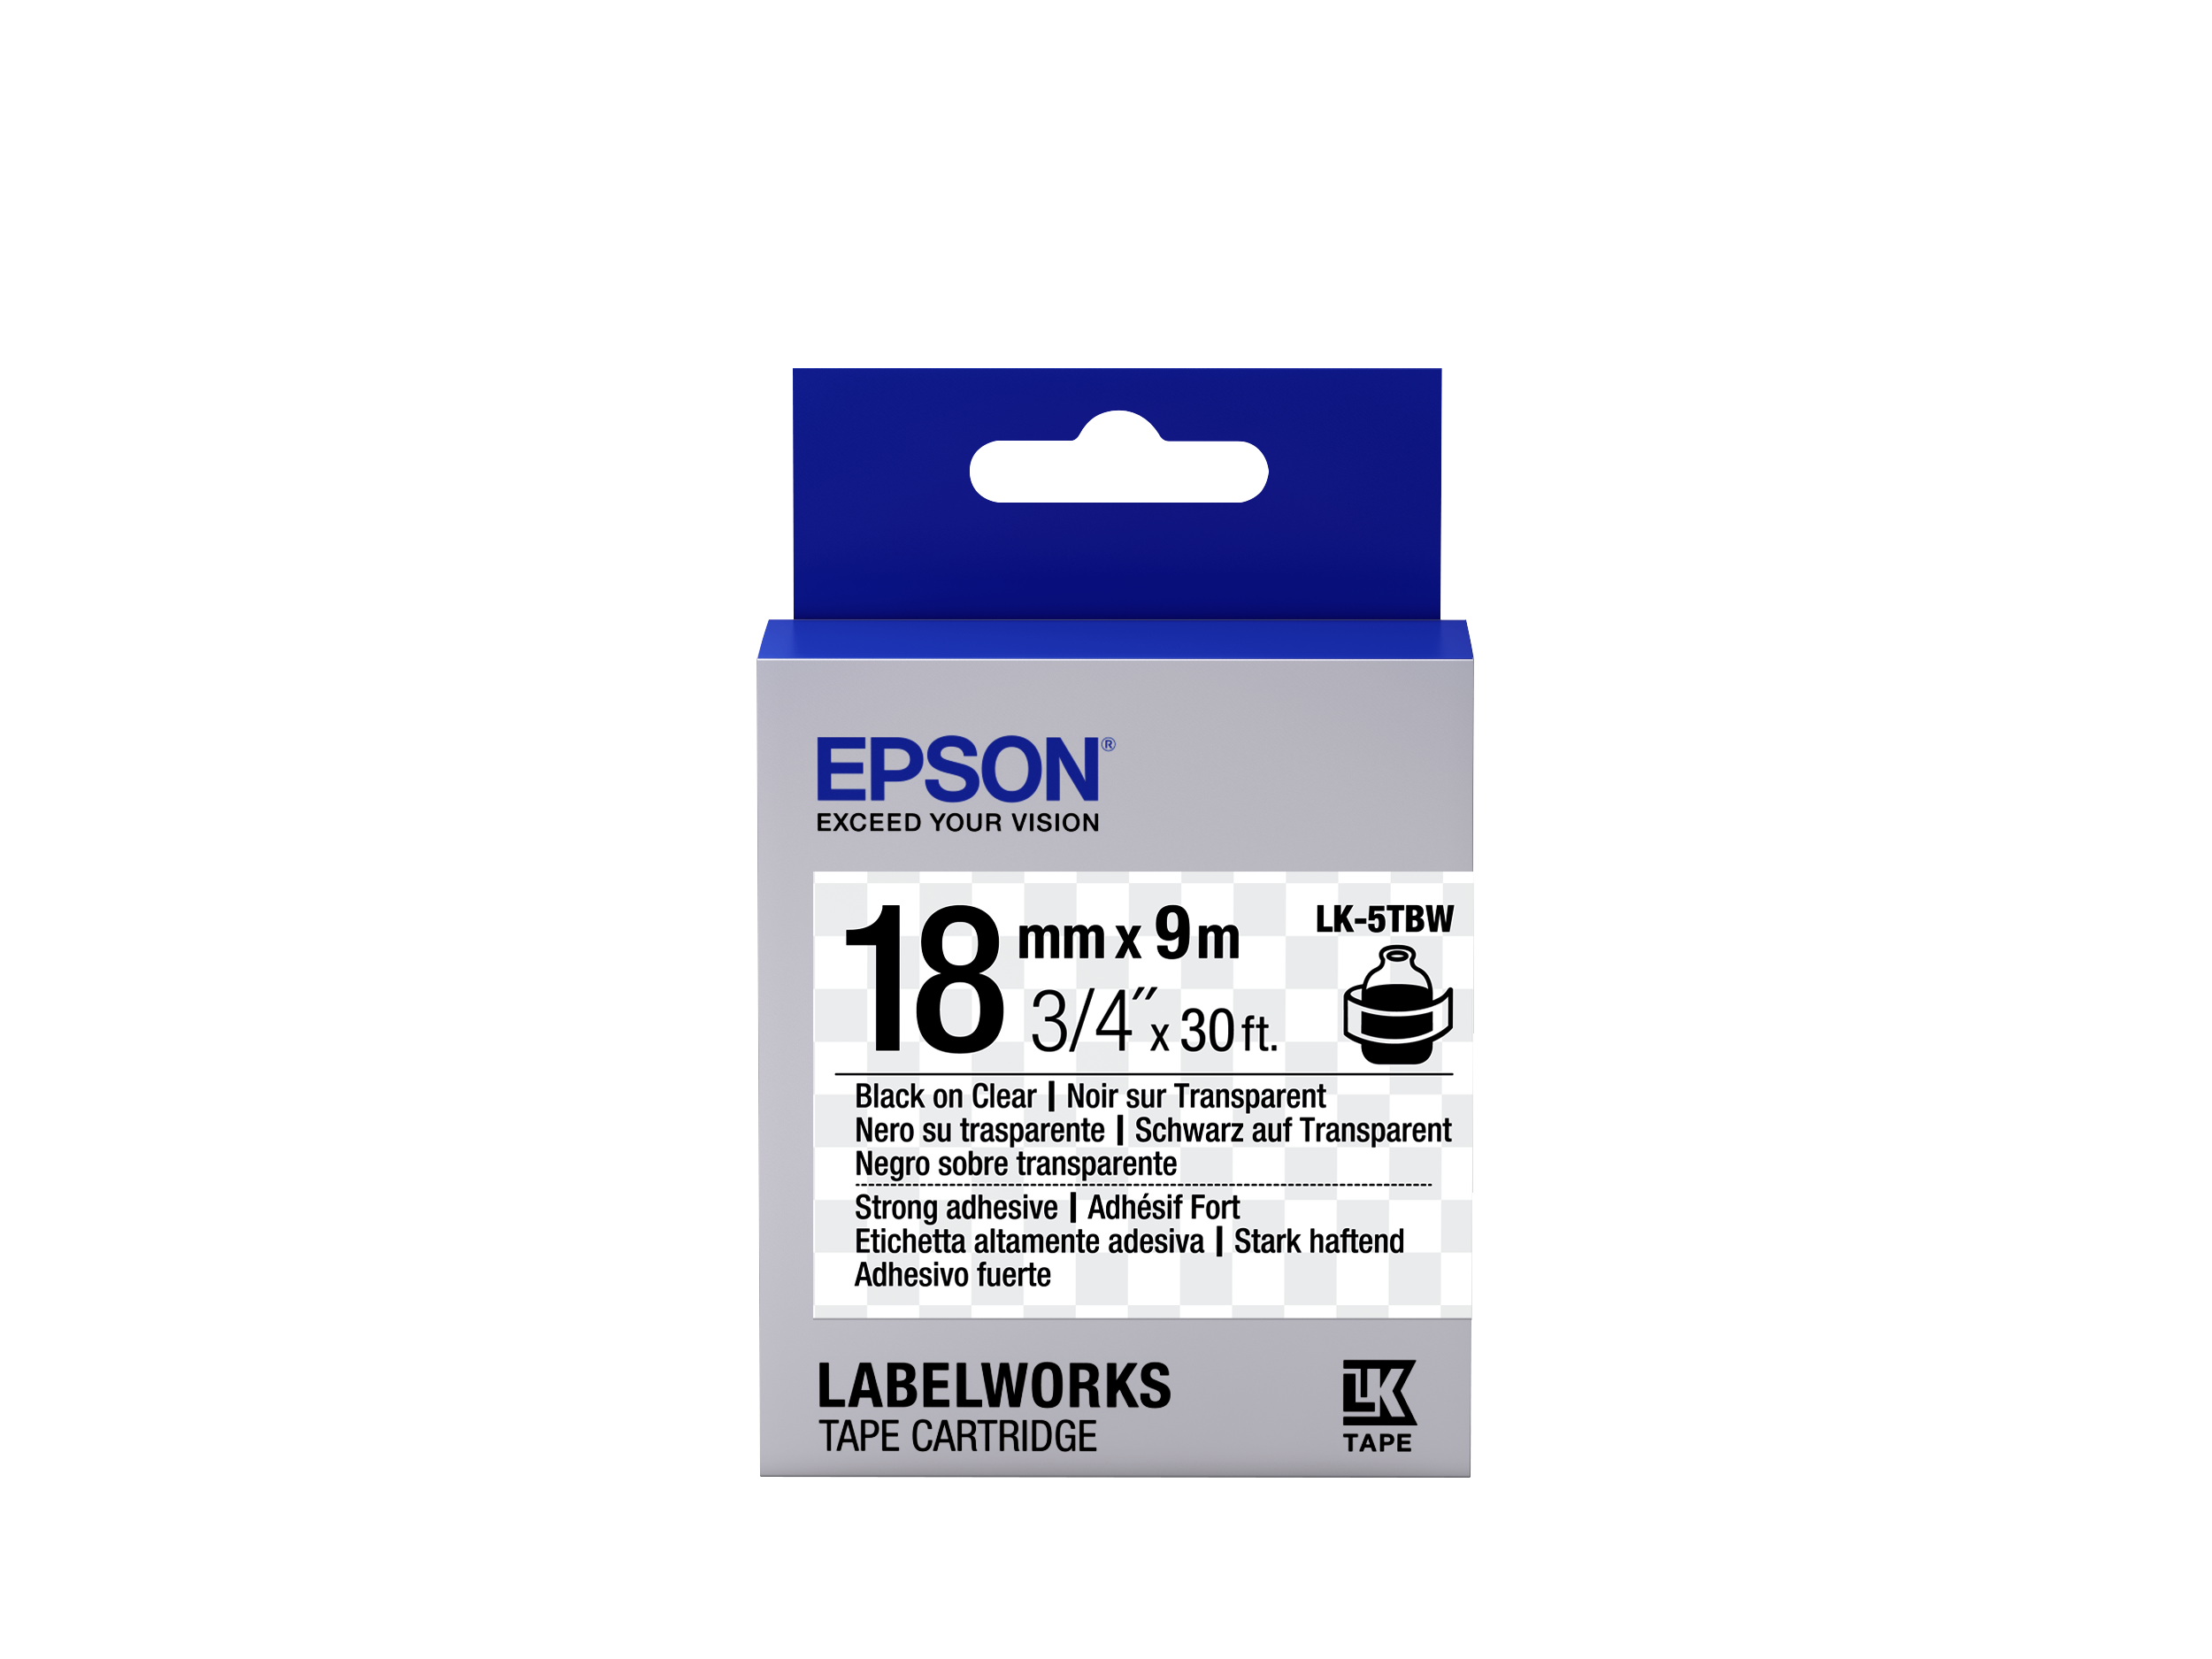 Epson Strong Adhesive Tape - LK-5TBW Strng adh Blk/Clear 18/9